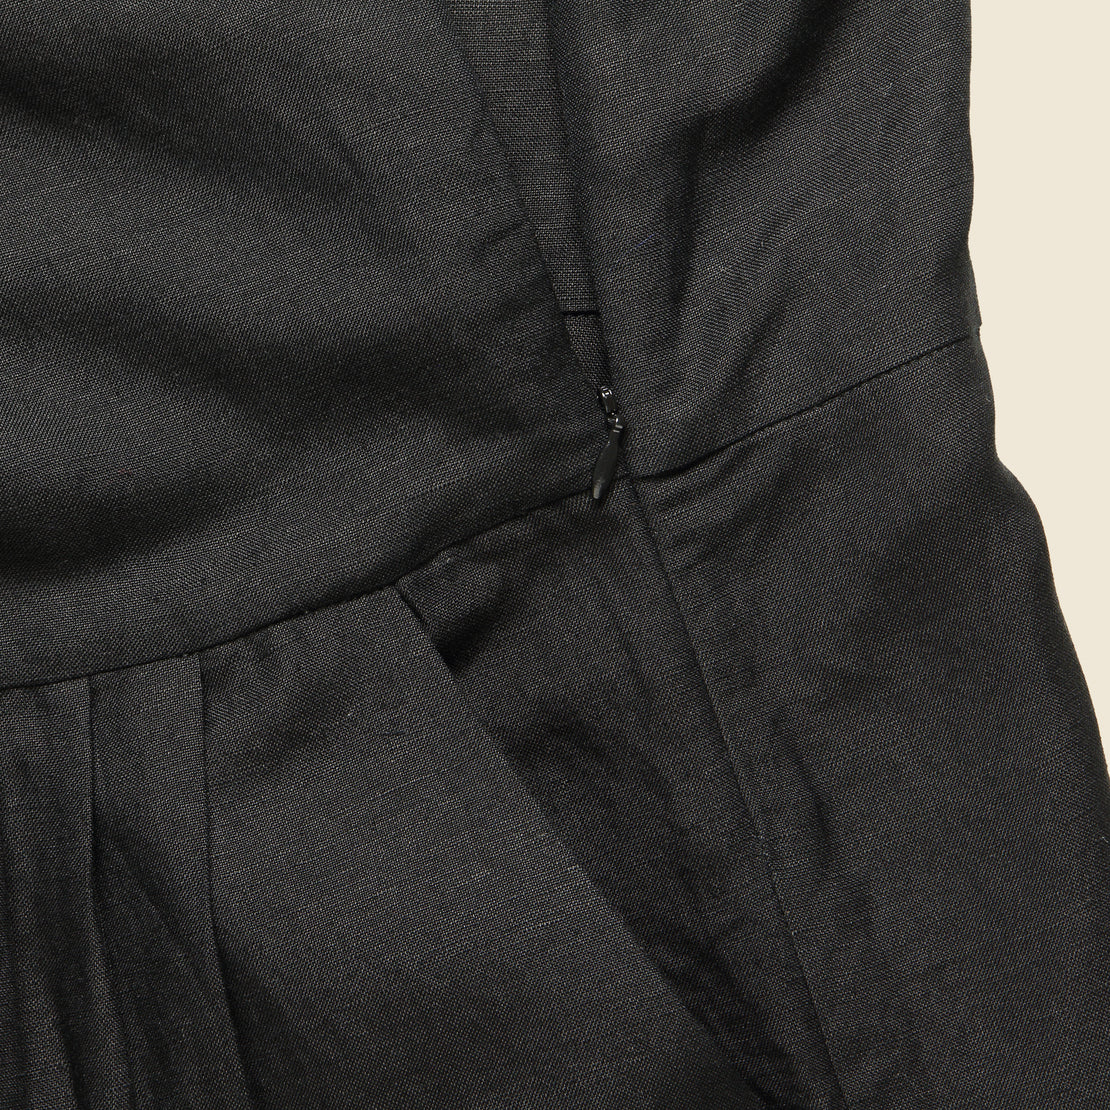 Tie Pant Suit - Black - First Rite - STAG Provisions - W - Onepiece - Jumpsuit